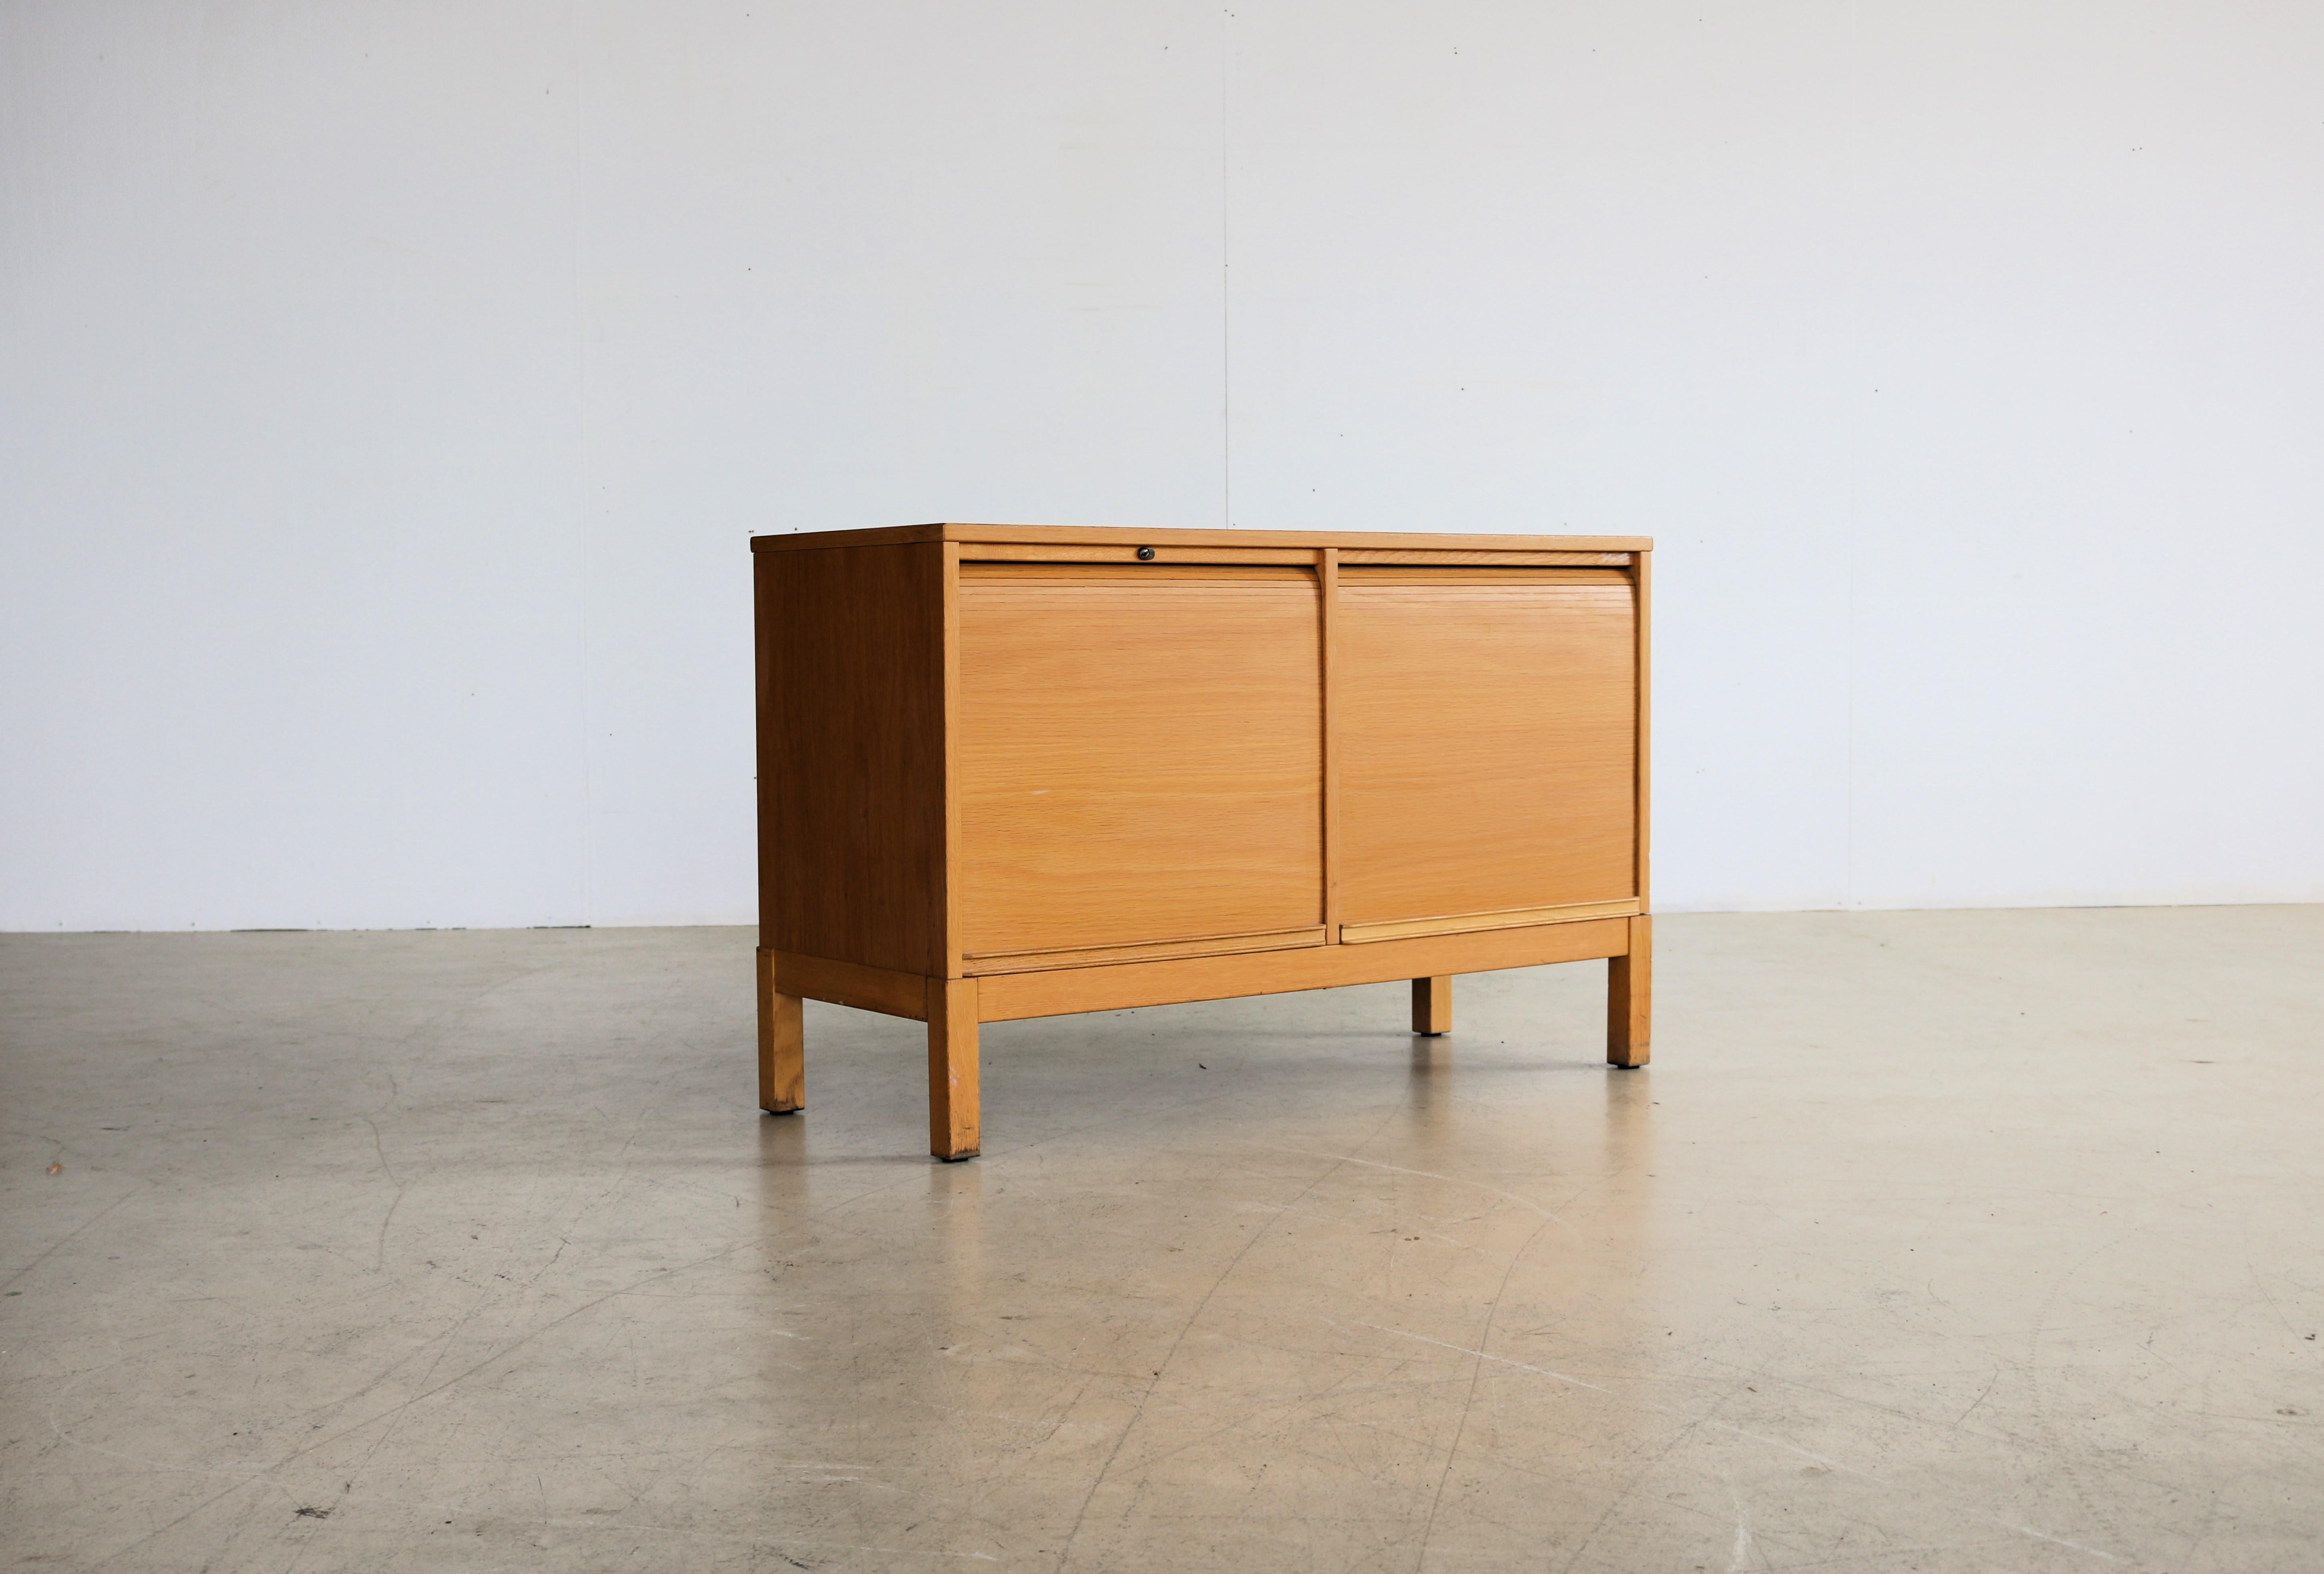 vintage sideboard | filing cabinet | 70s | Kinnarps

period | 70s
designs | Kinnarps | Sweden
conditions | good | light signs of use | key is missing
size | 66 x 104 x 41 (hxwxd)

details | oak; beech; tambour doors;

article number | 2094